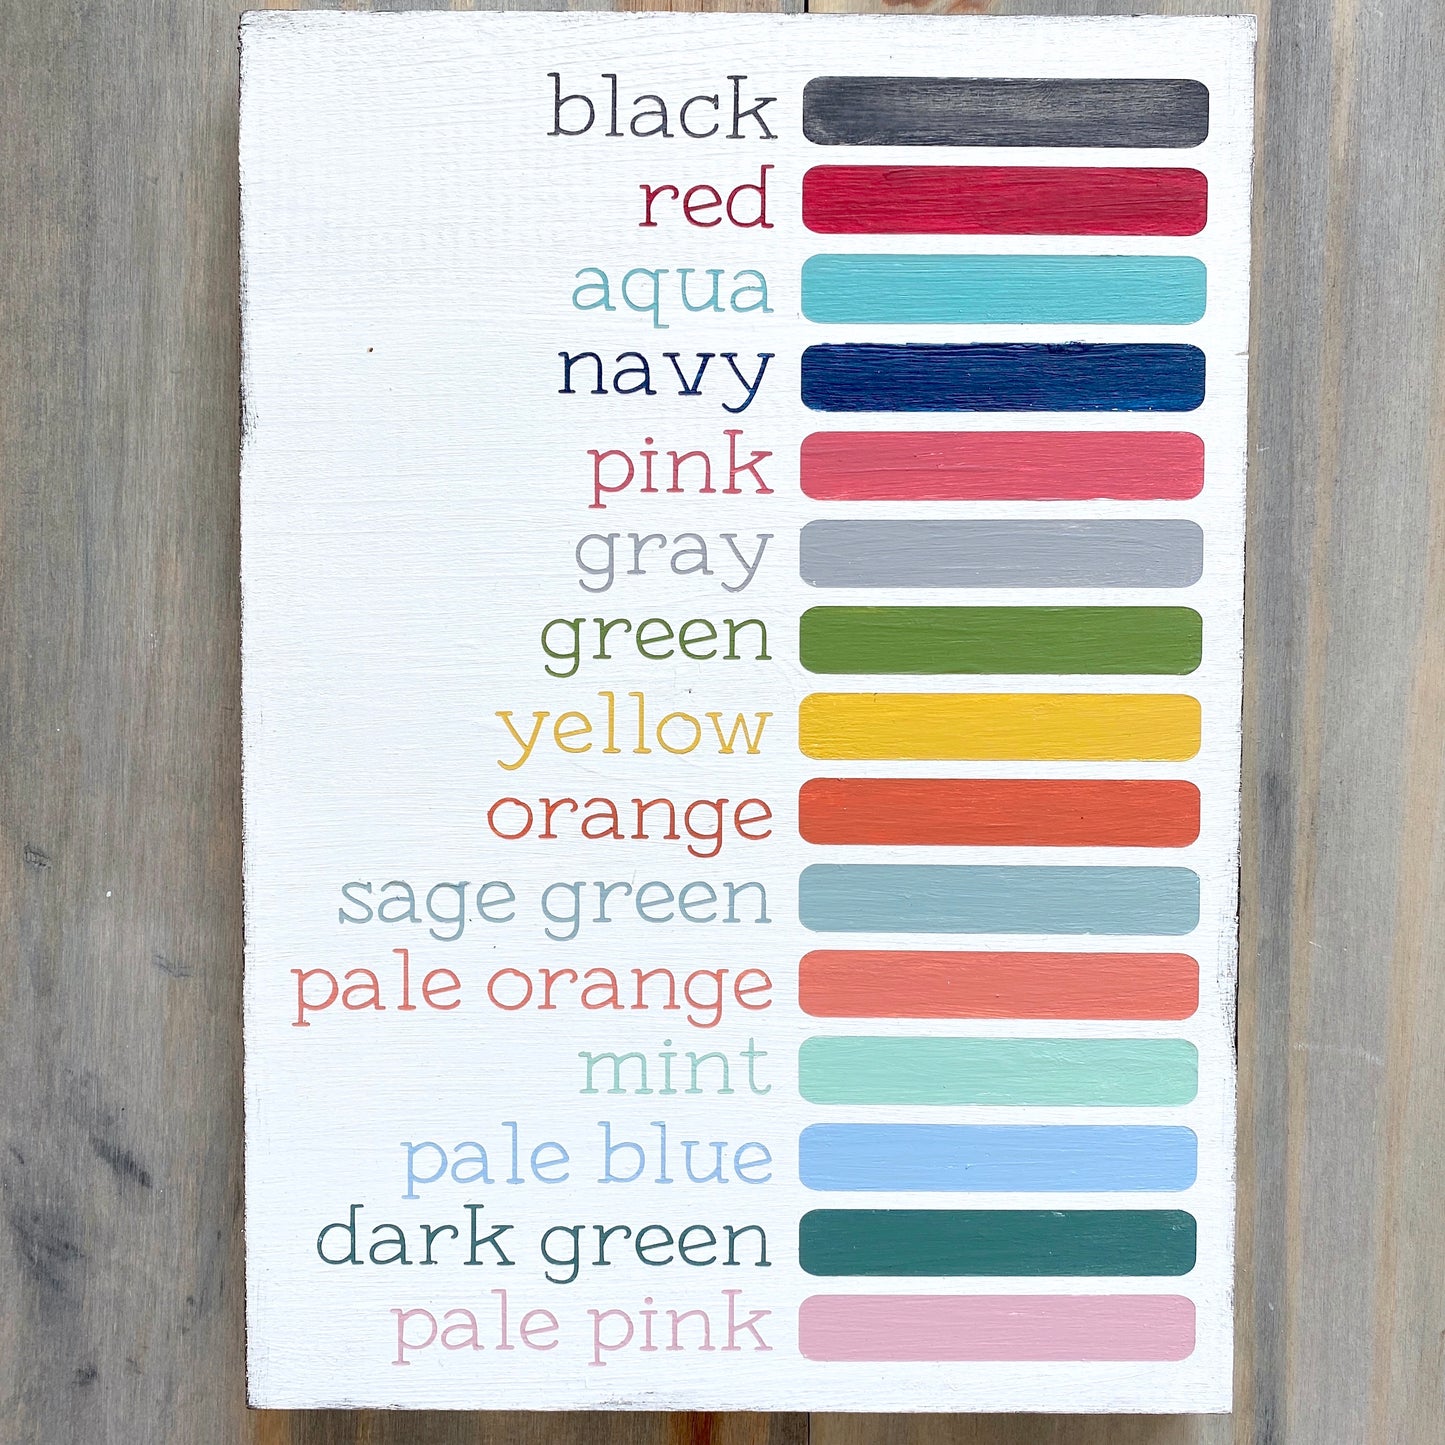 Anchored Soul color Display Photo with wood sign showing all available colors painted in words and color block - black, red, aqua, navy, pink, gray, green, yellow, orange, sage green, pale orange, mint, pale blue, dark green, pale pinkAnchored Soul color Display Photo with wood sign showing all available colors painted in words and color block - black, red, aqua, navy, pink, gray, green, yellow, orange, sage green, pale orange, mint, pale blue, dark green, pale pink